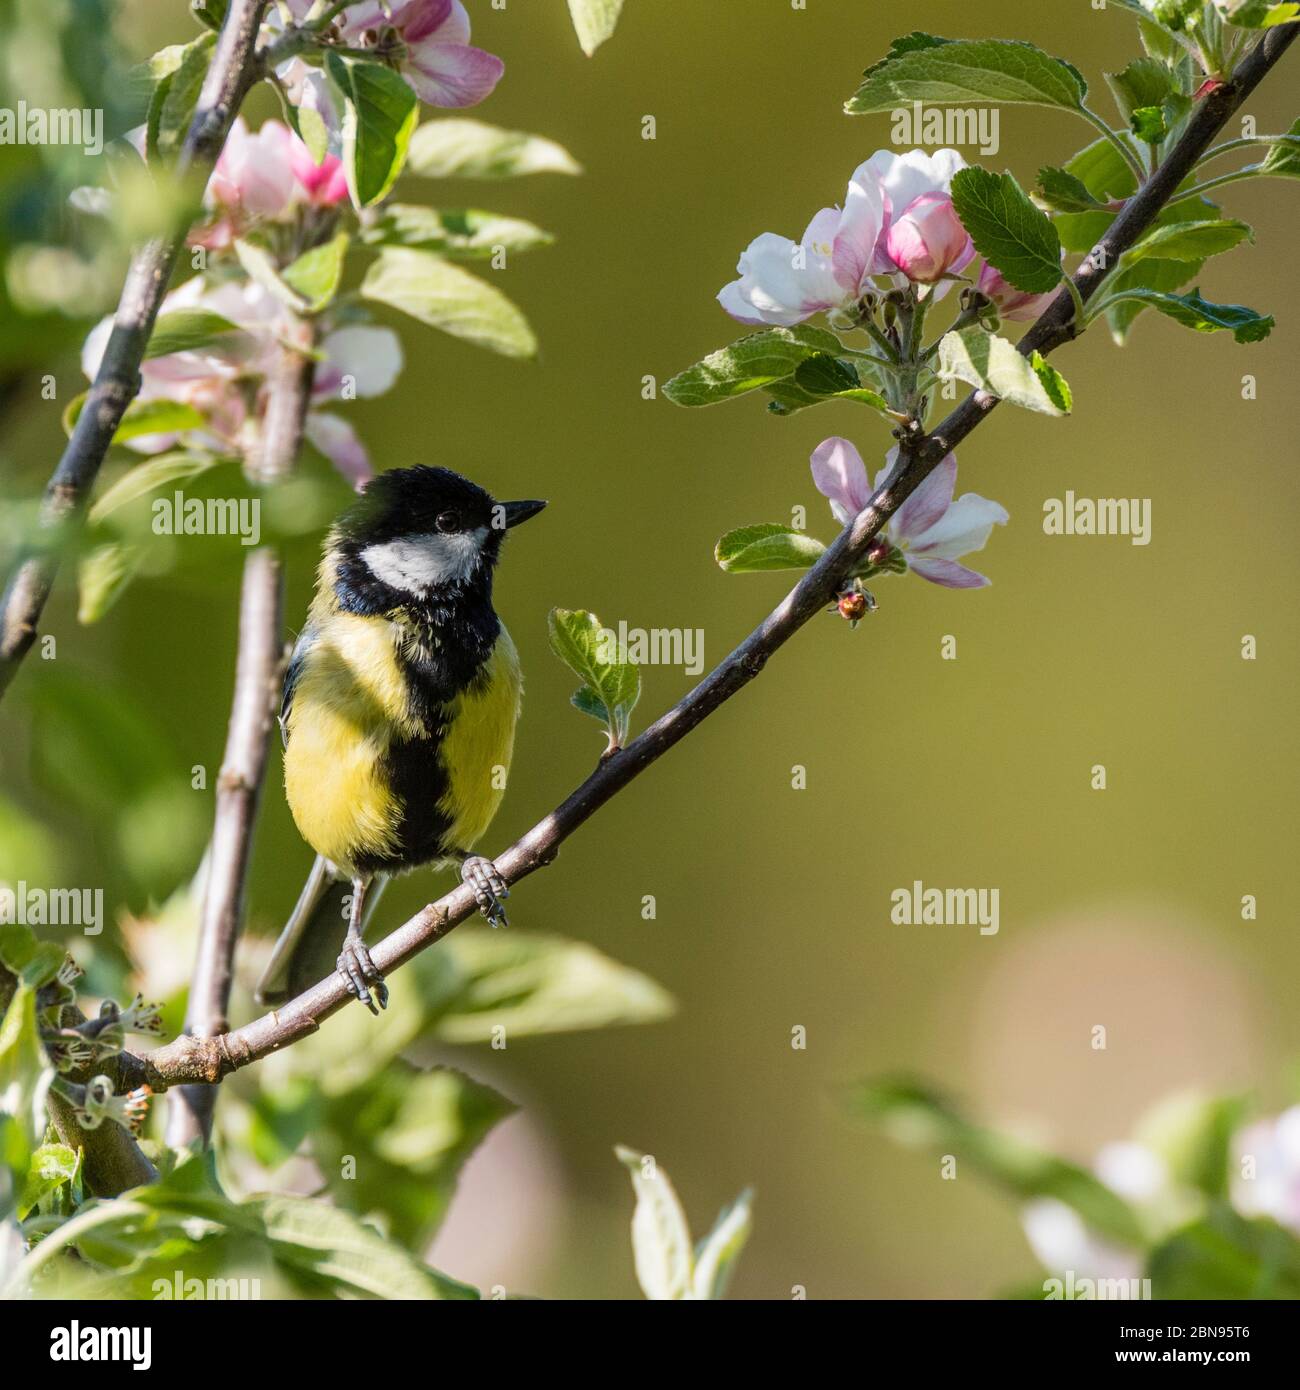 A Great Tit (Parus major) in the Uk Stock Photo